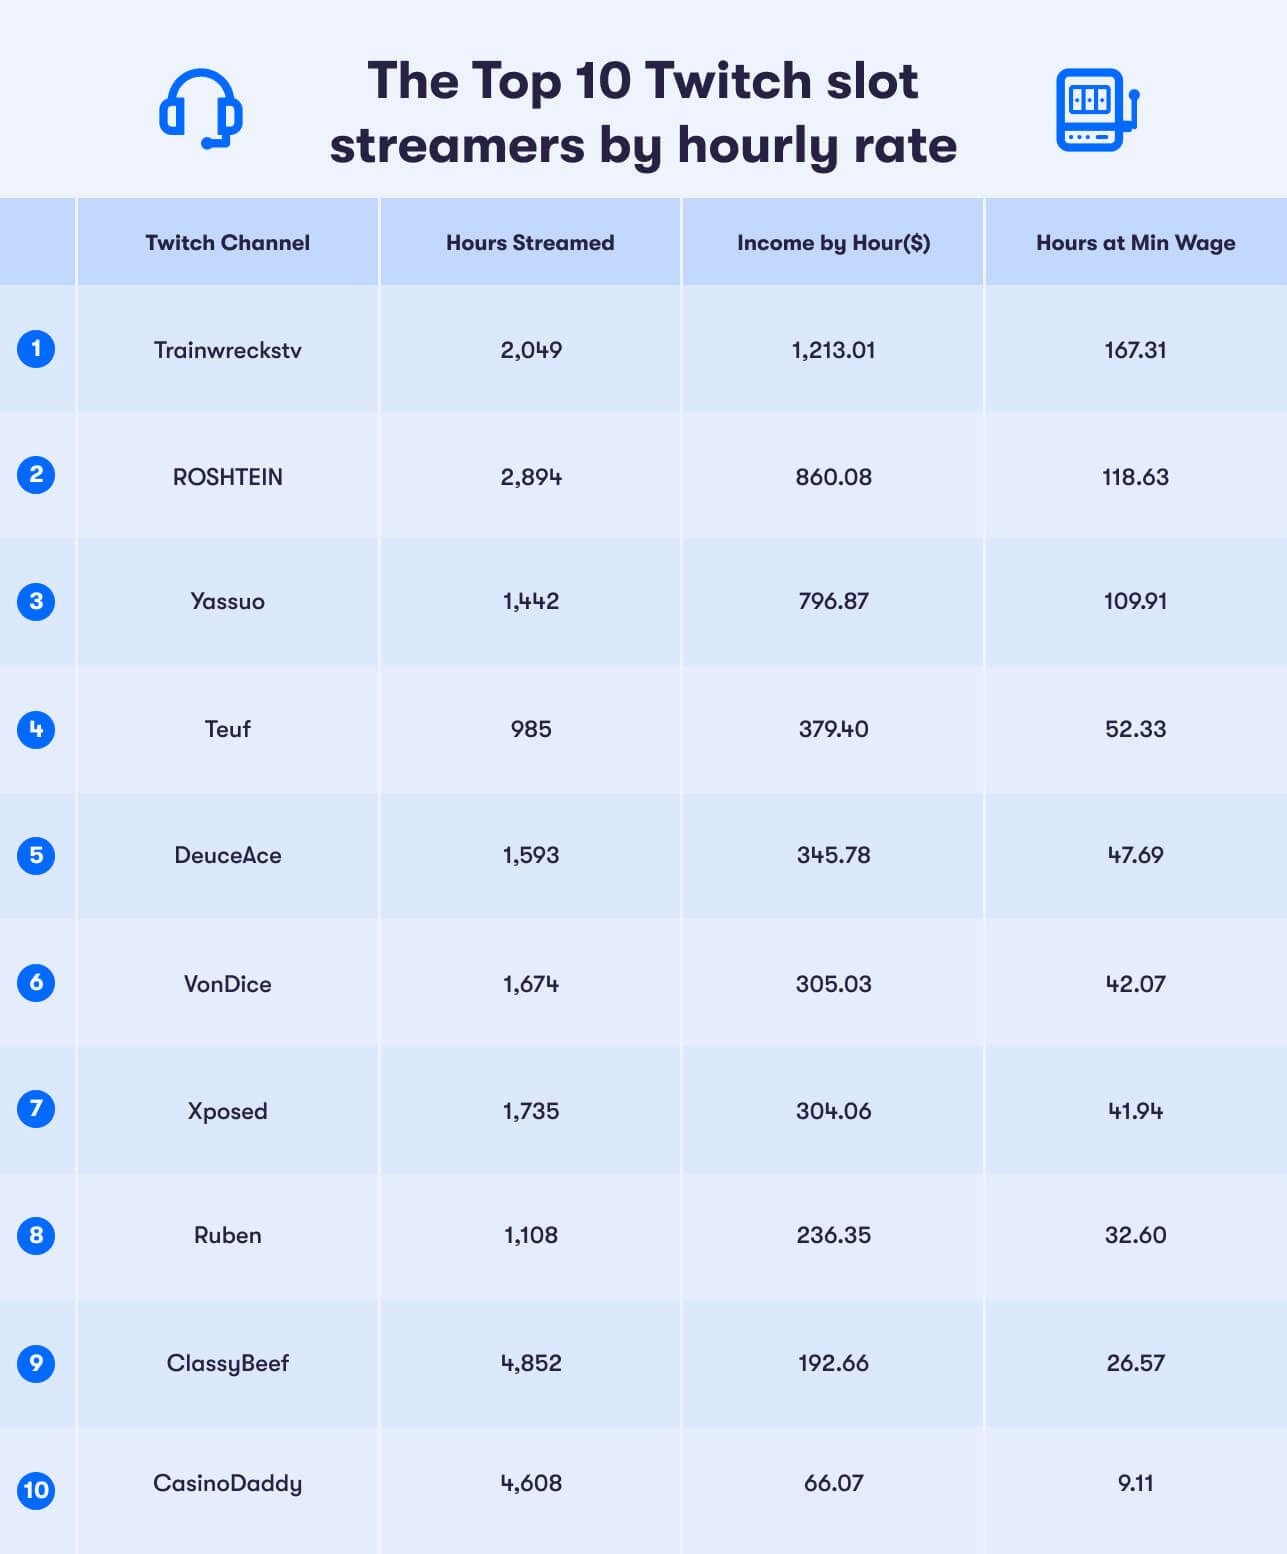 Top 10 Twitch Slot Streamers By Hourly Rate